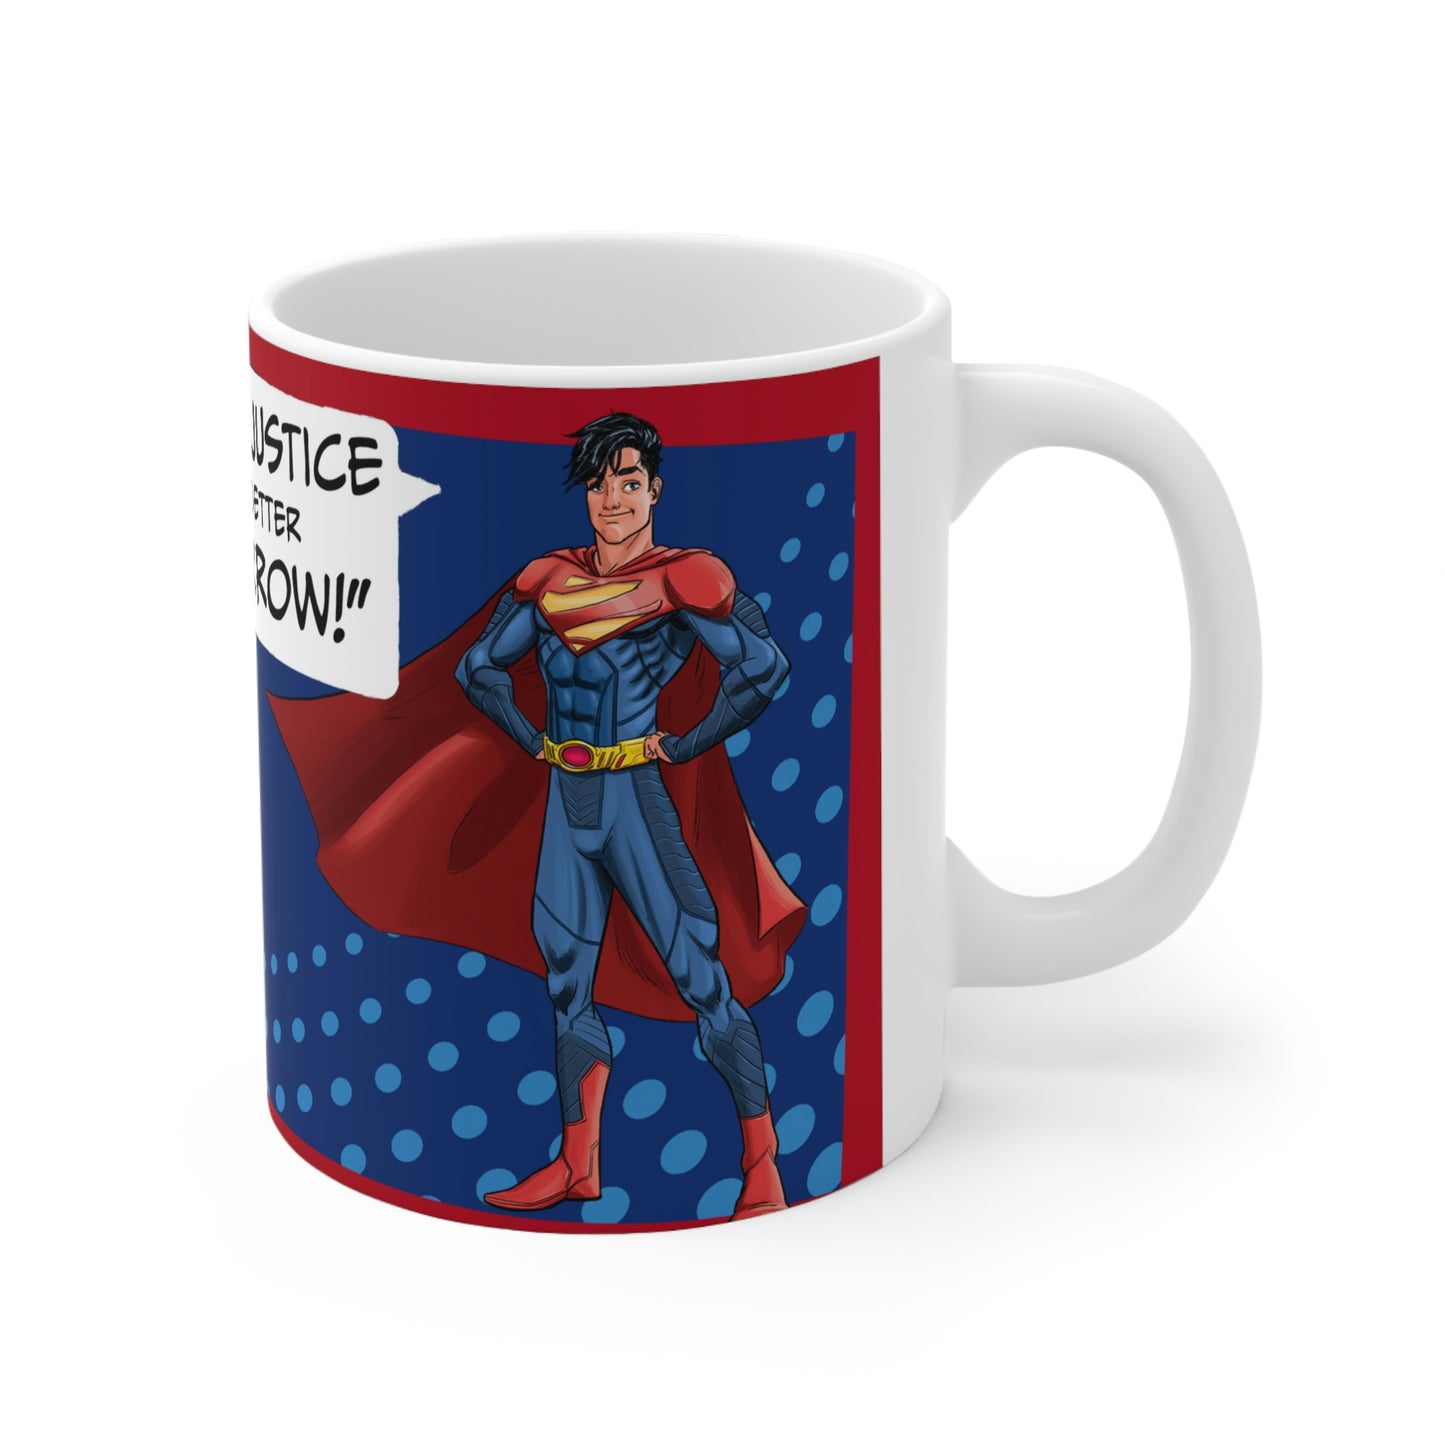 "Truth, Justice, and a Better Tomorrow" Mug